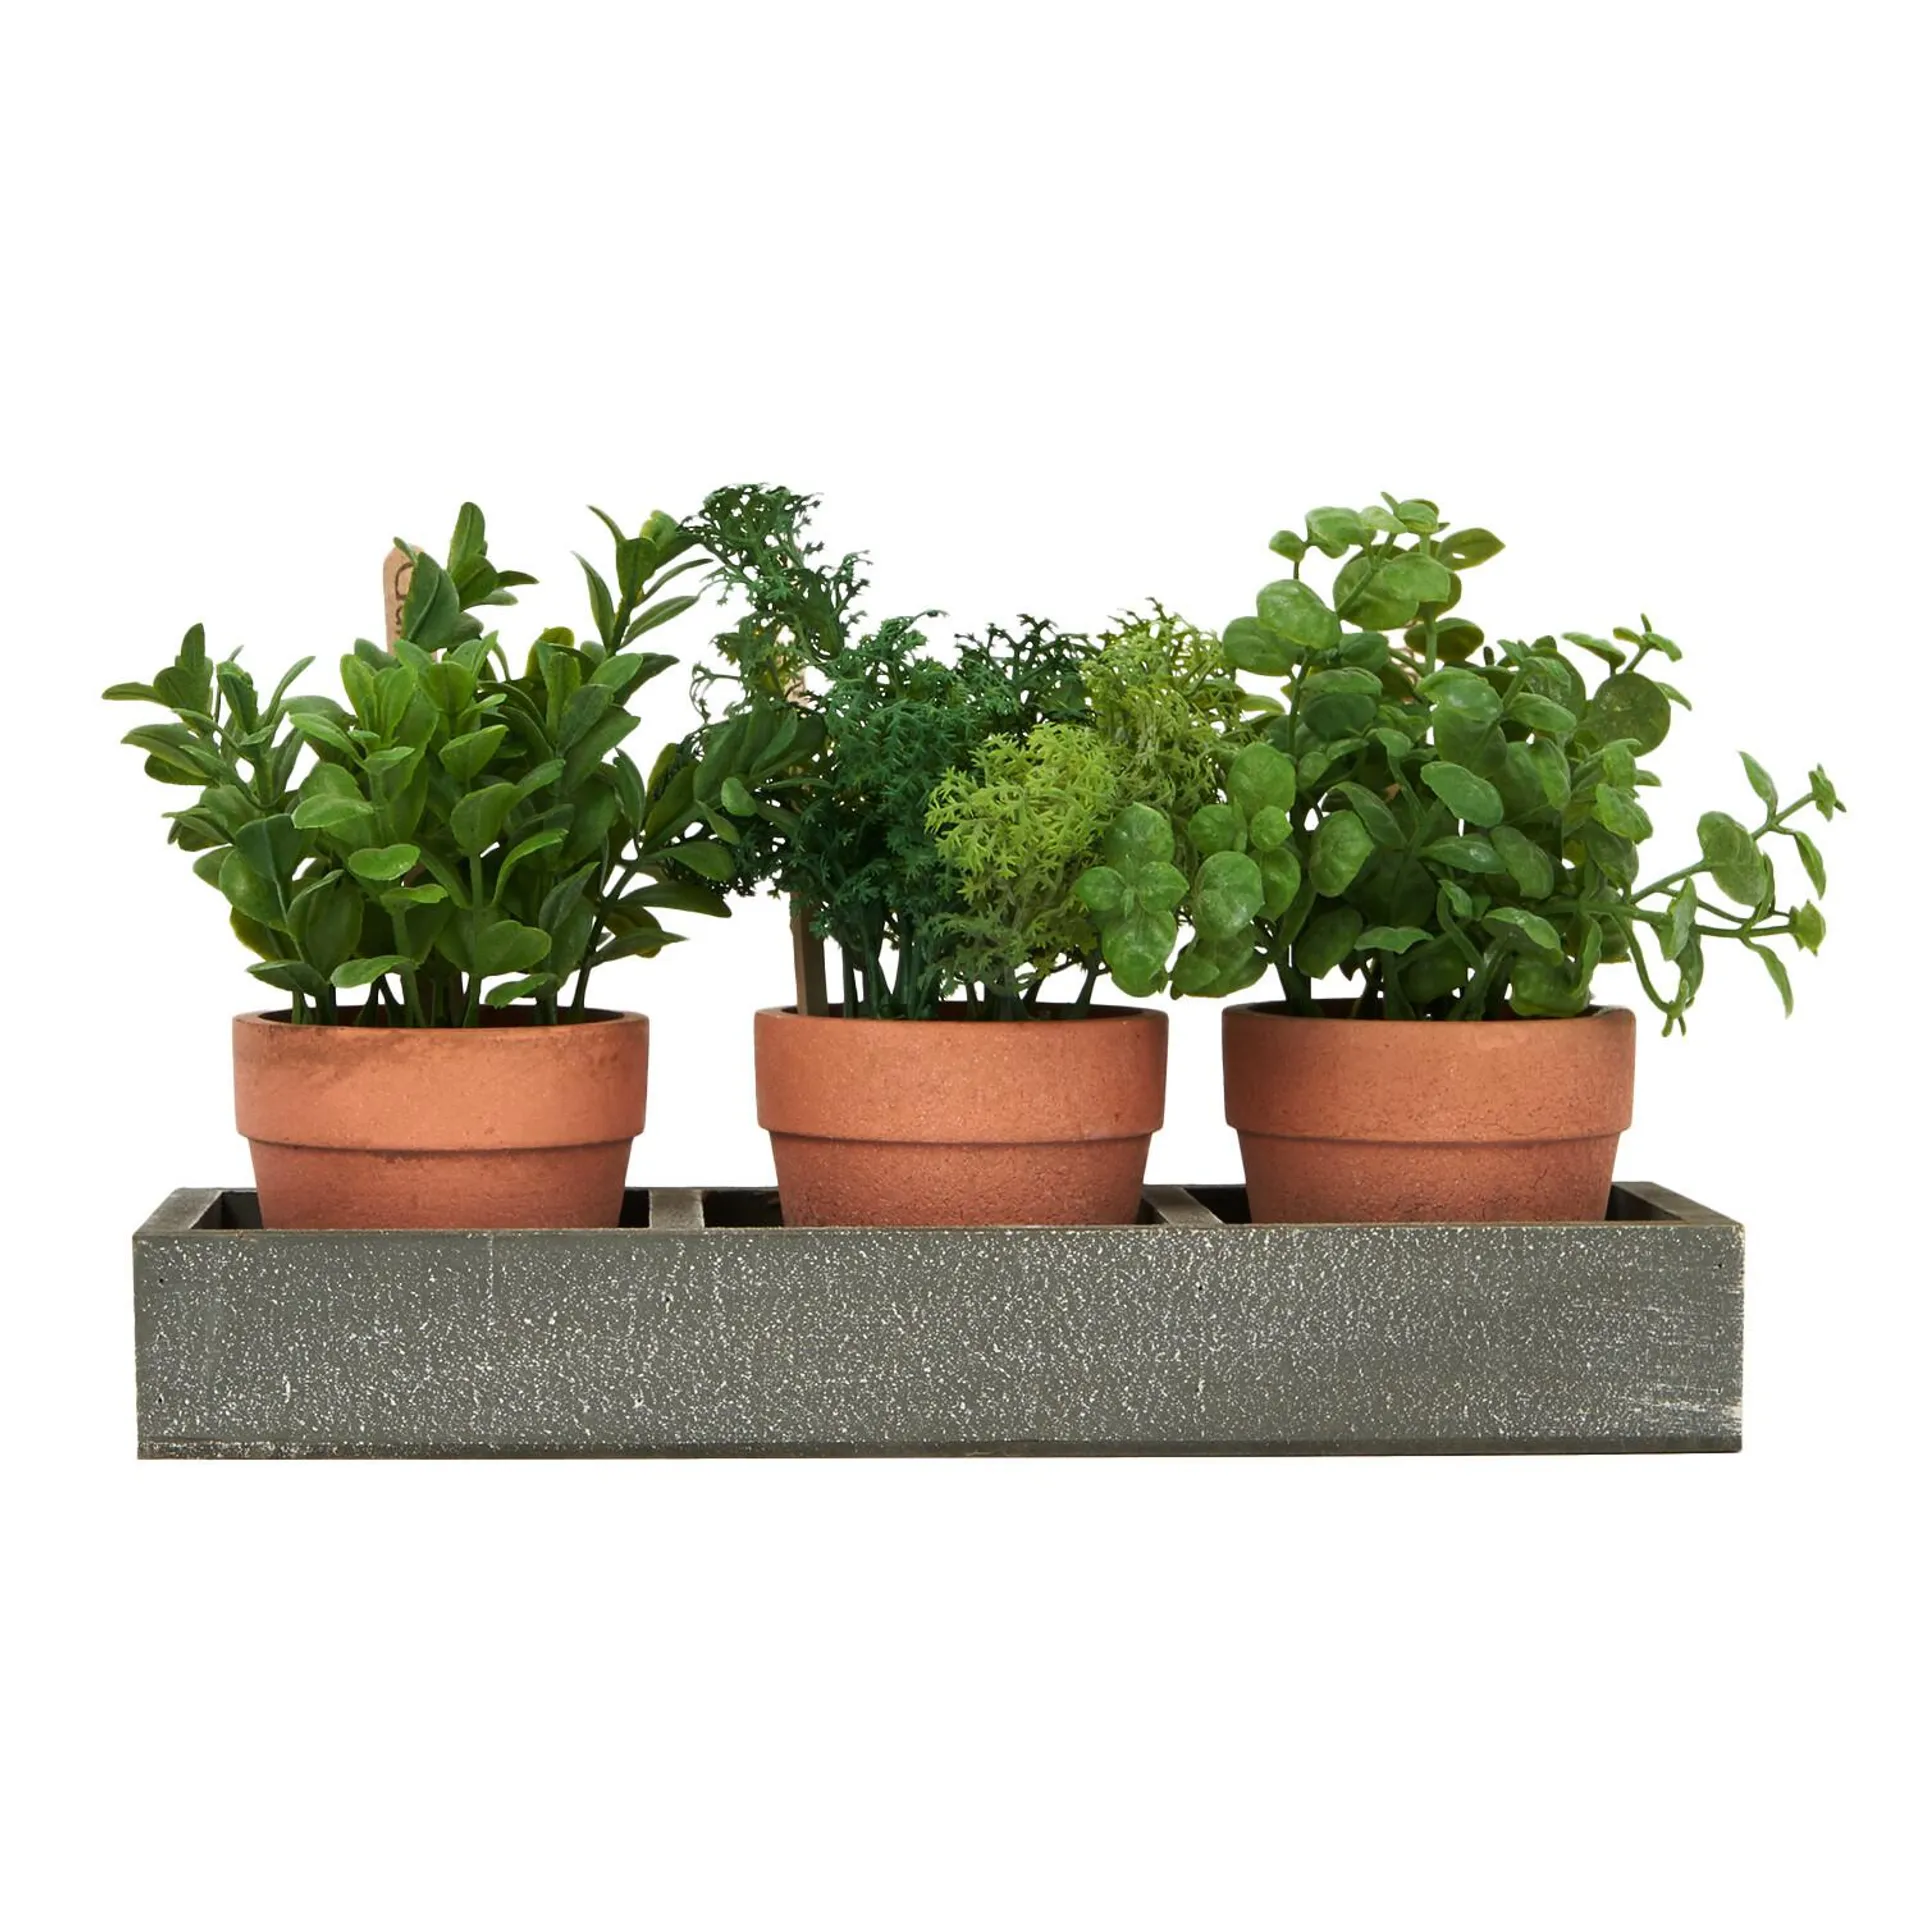 Set of 3 Potted Herbs in Tray - Grey